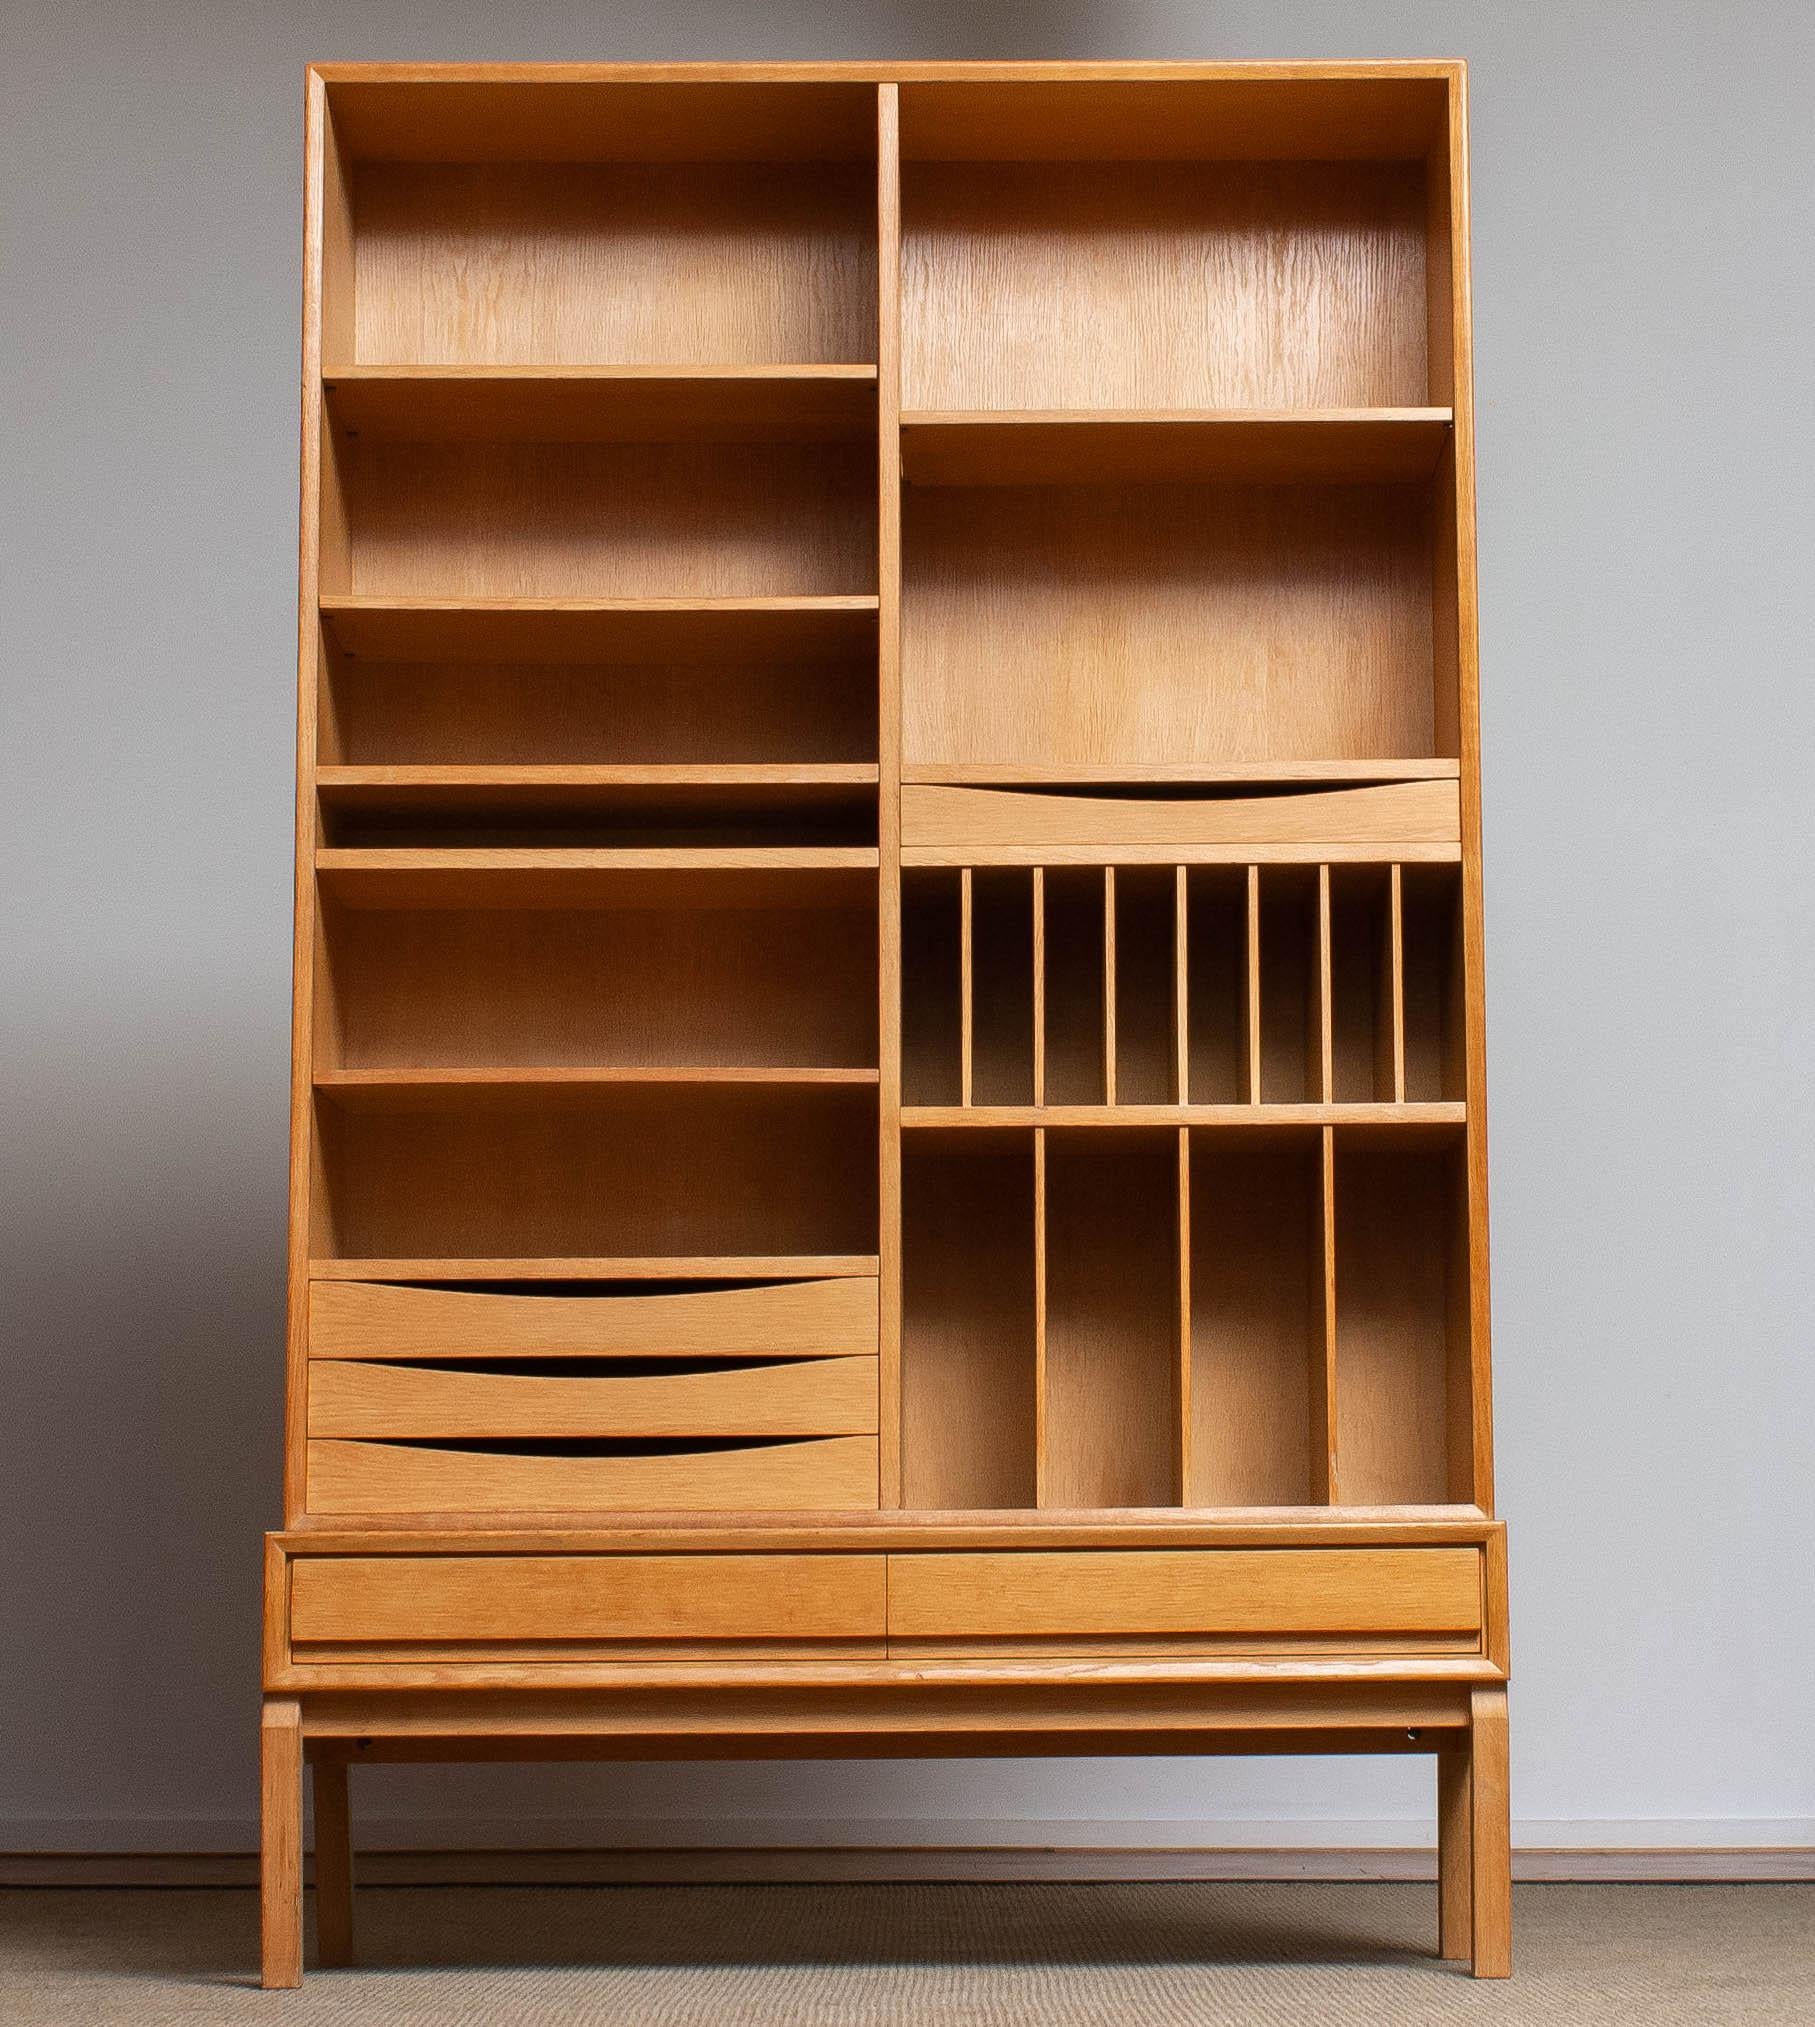 Beautiful and good quality bookcase in white oak designed by Marian Grabinsky for Ikea in 1962.
The lower board has two drawers in oak and the top has four oak drawers and four adjustable shelfs also in oak.
Overall in good condition.